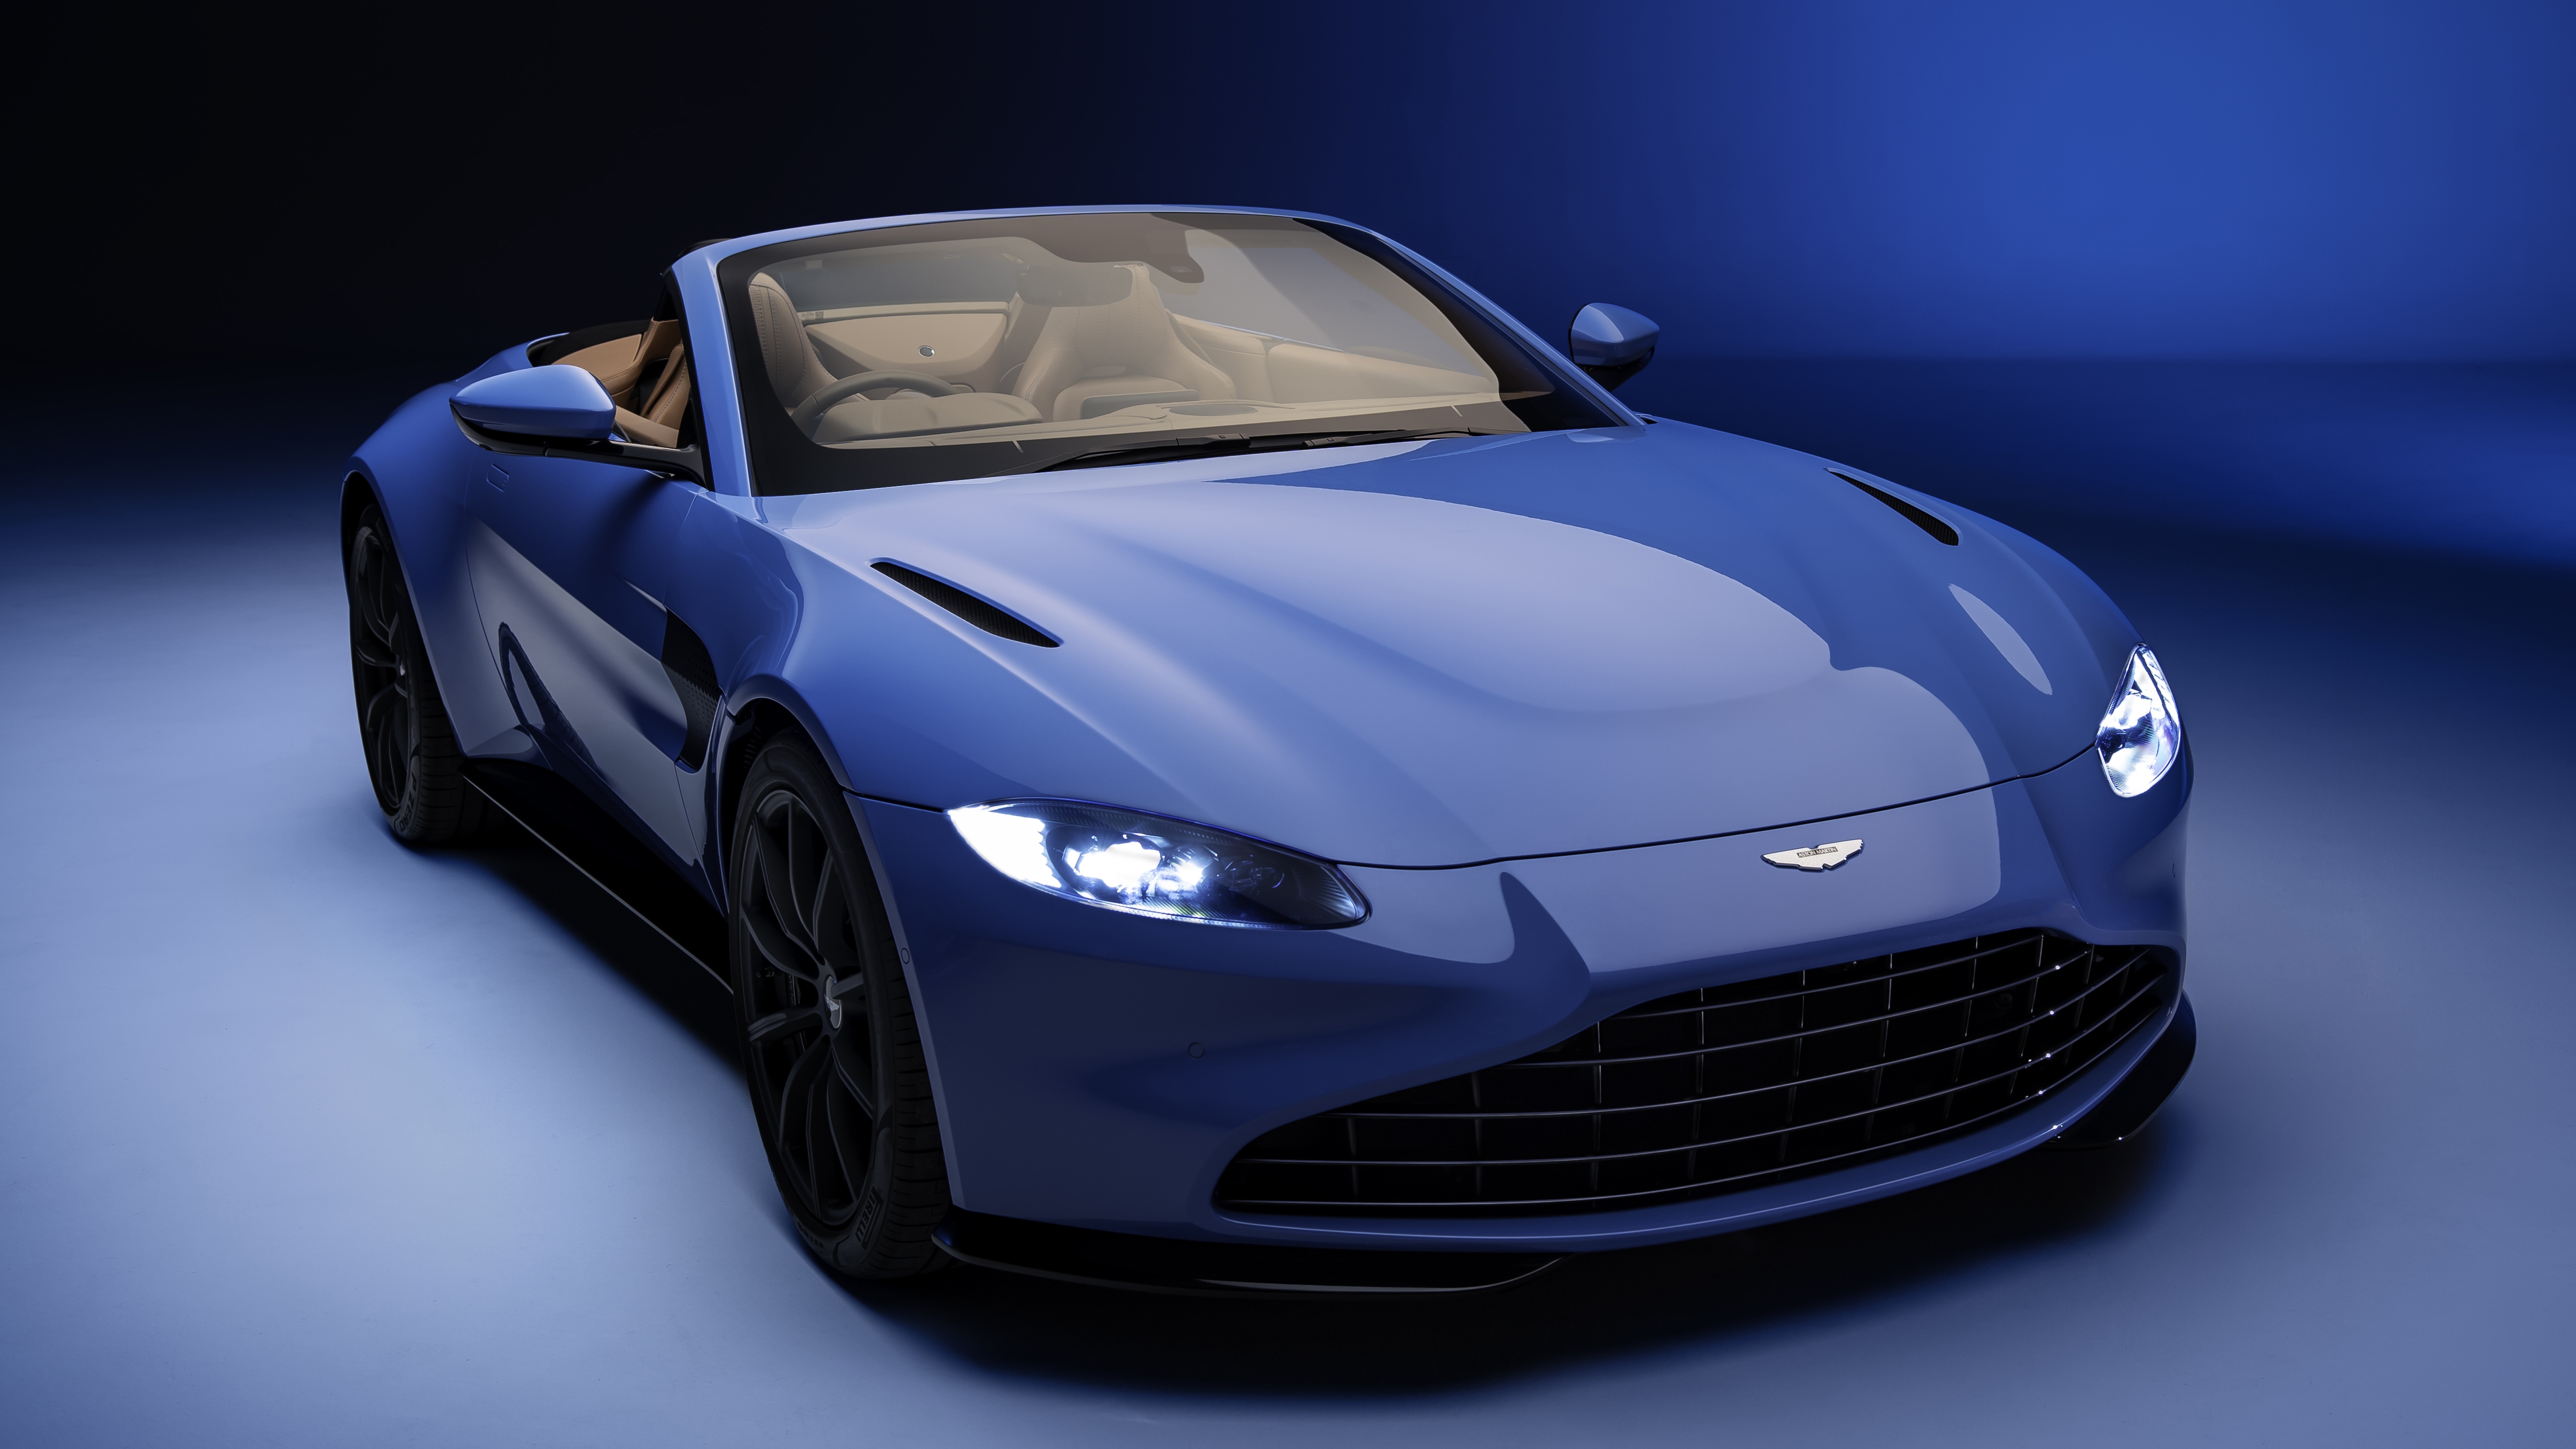 Wallpapers Aston Martin Vantage Roadster front view blue on the desktop